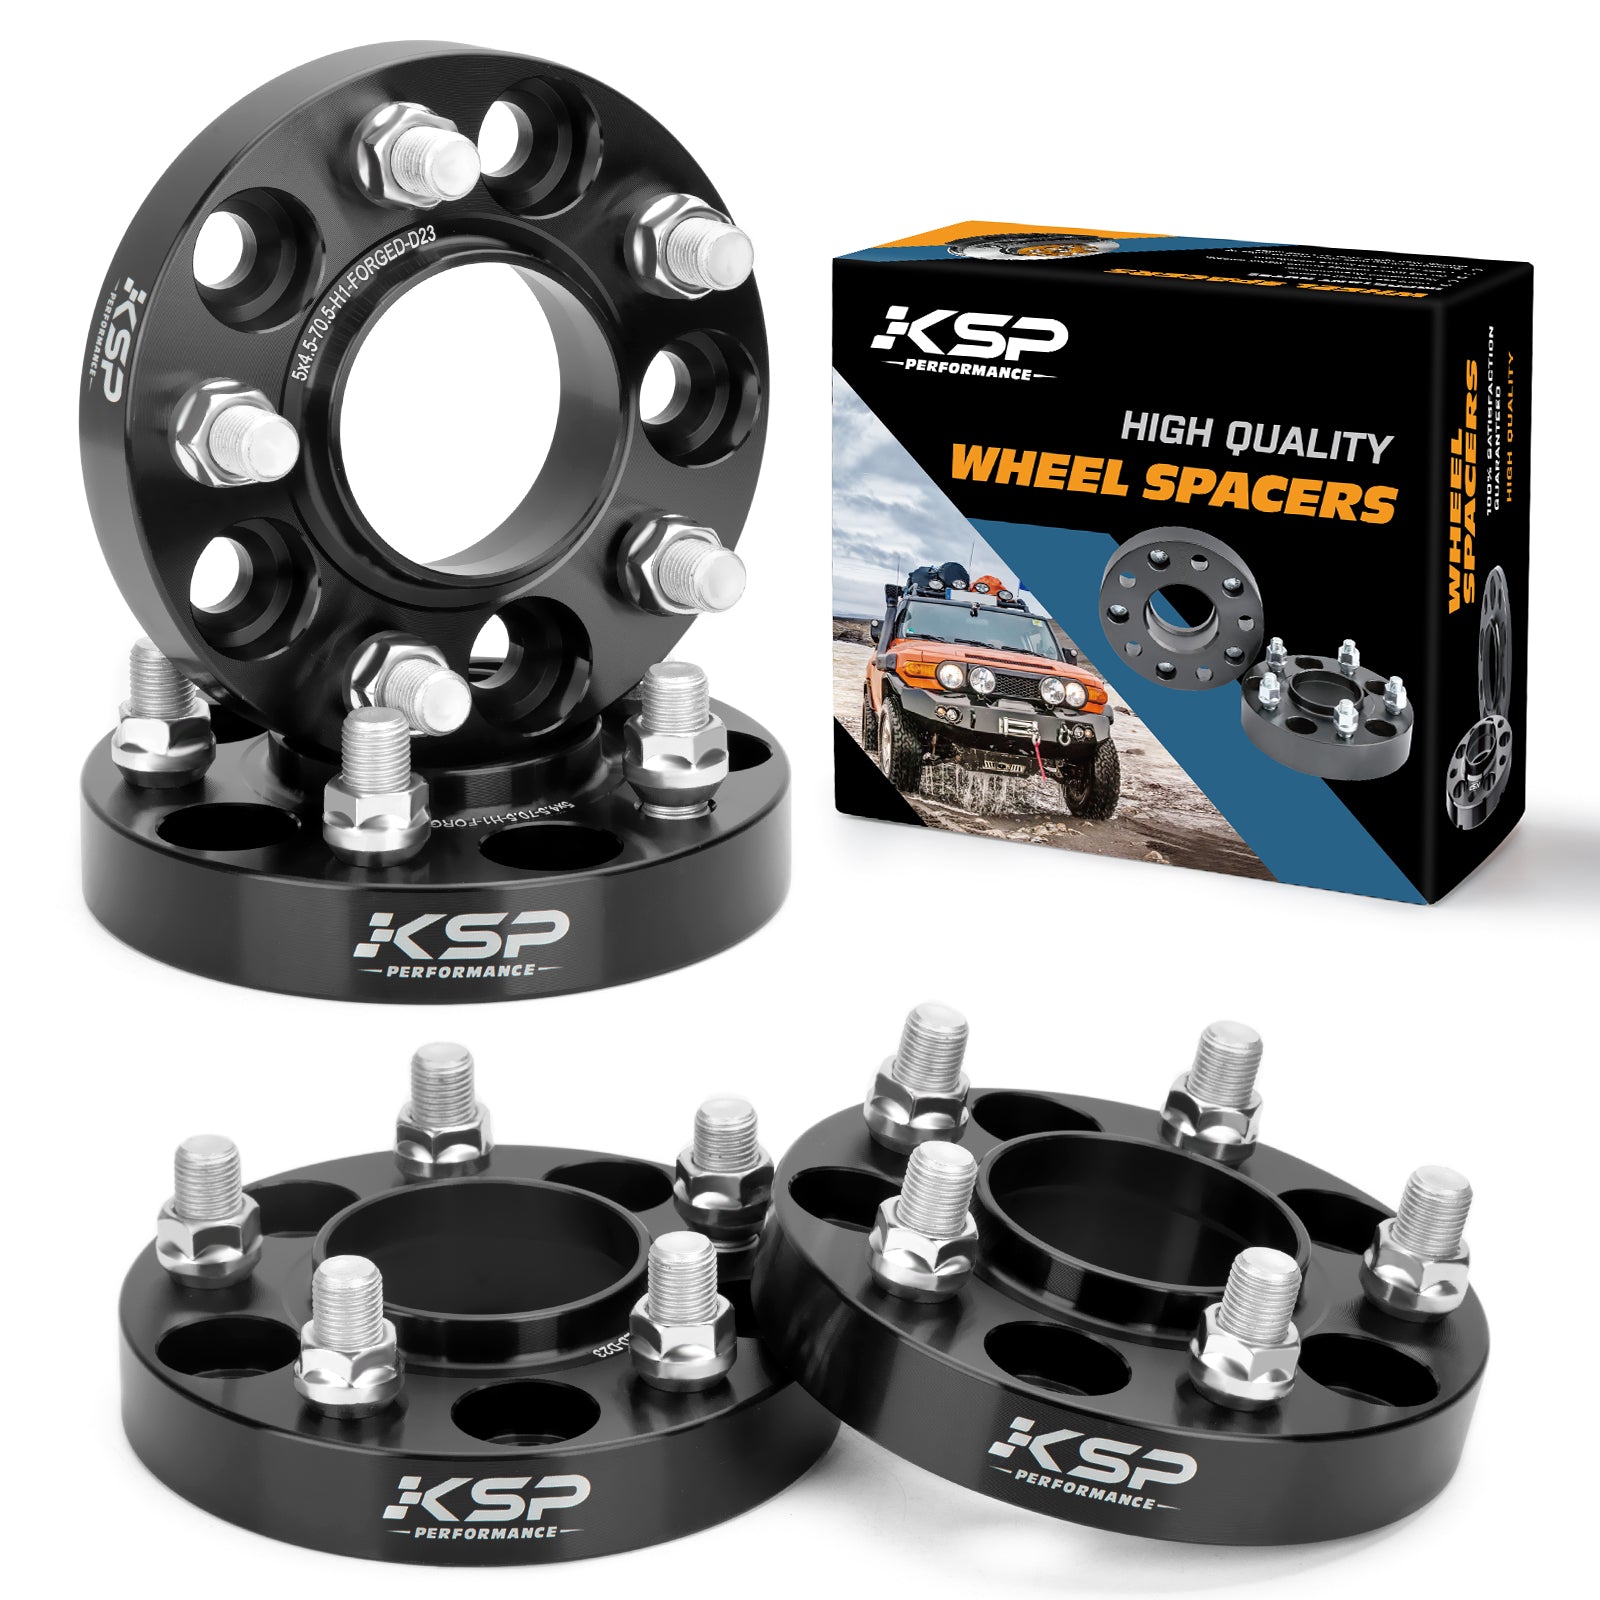 1" Hubcentric Wheel Spacers For 2015-2020 Ford Mustang xccscss.